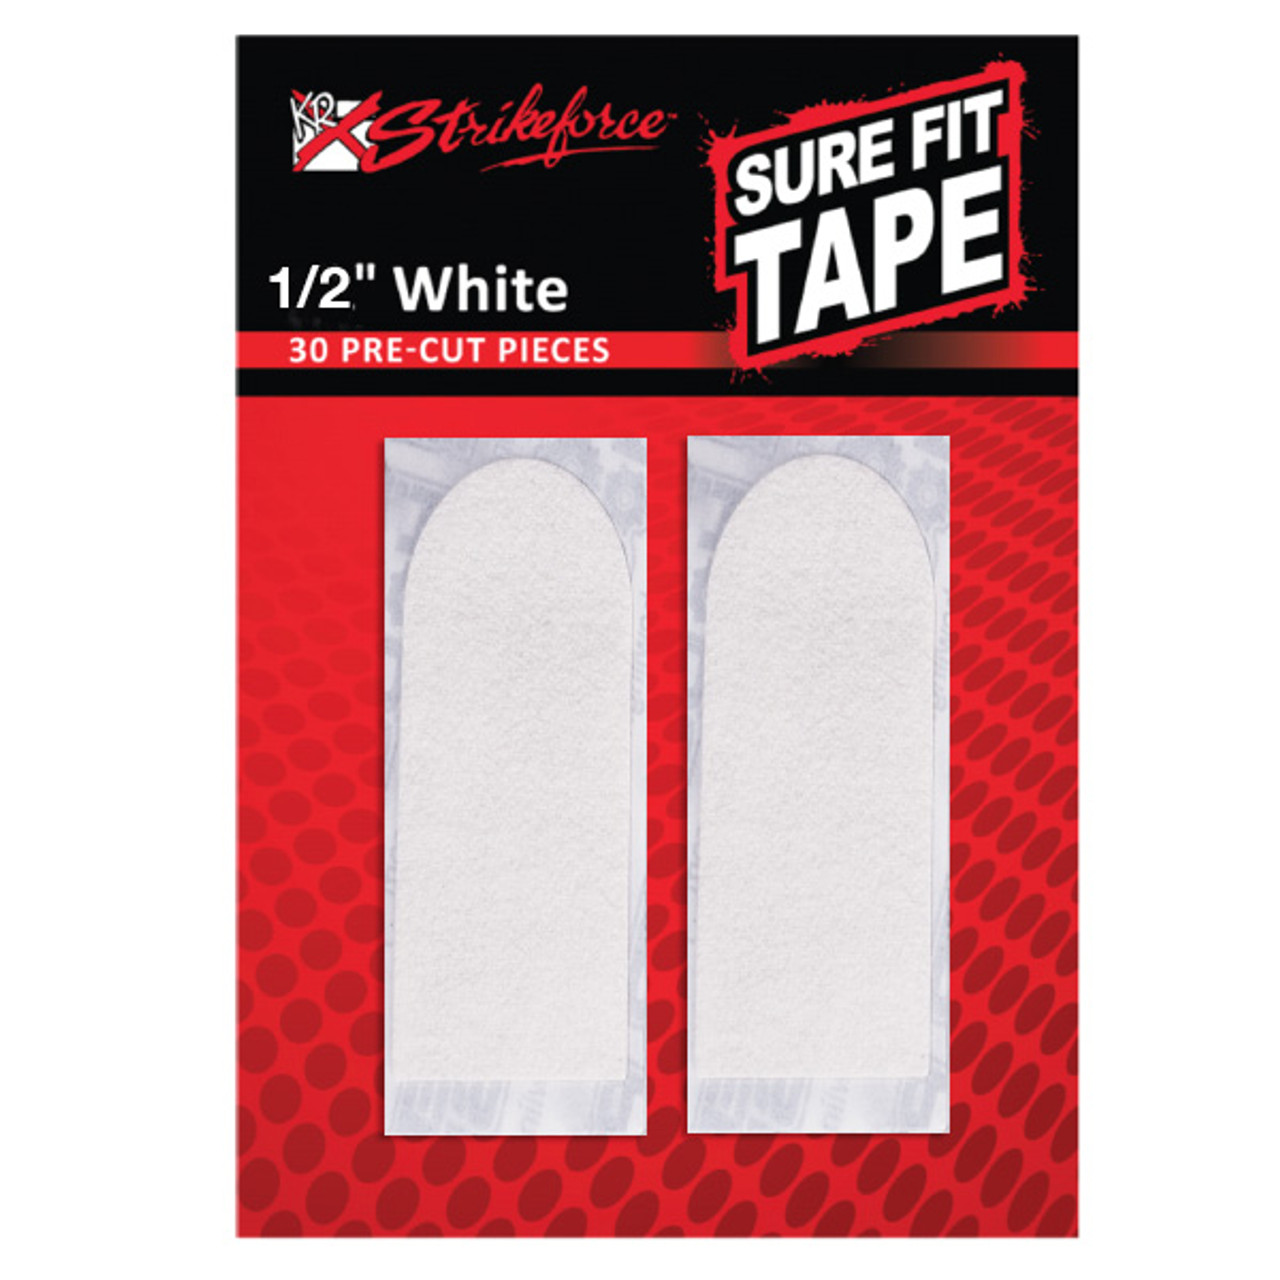 KR Strikeforce Sure Fit Tape 1/2" White Textured - 30 Pack